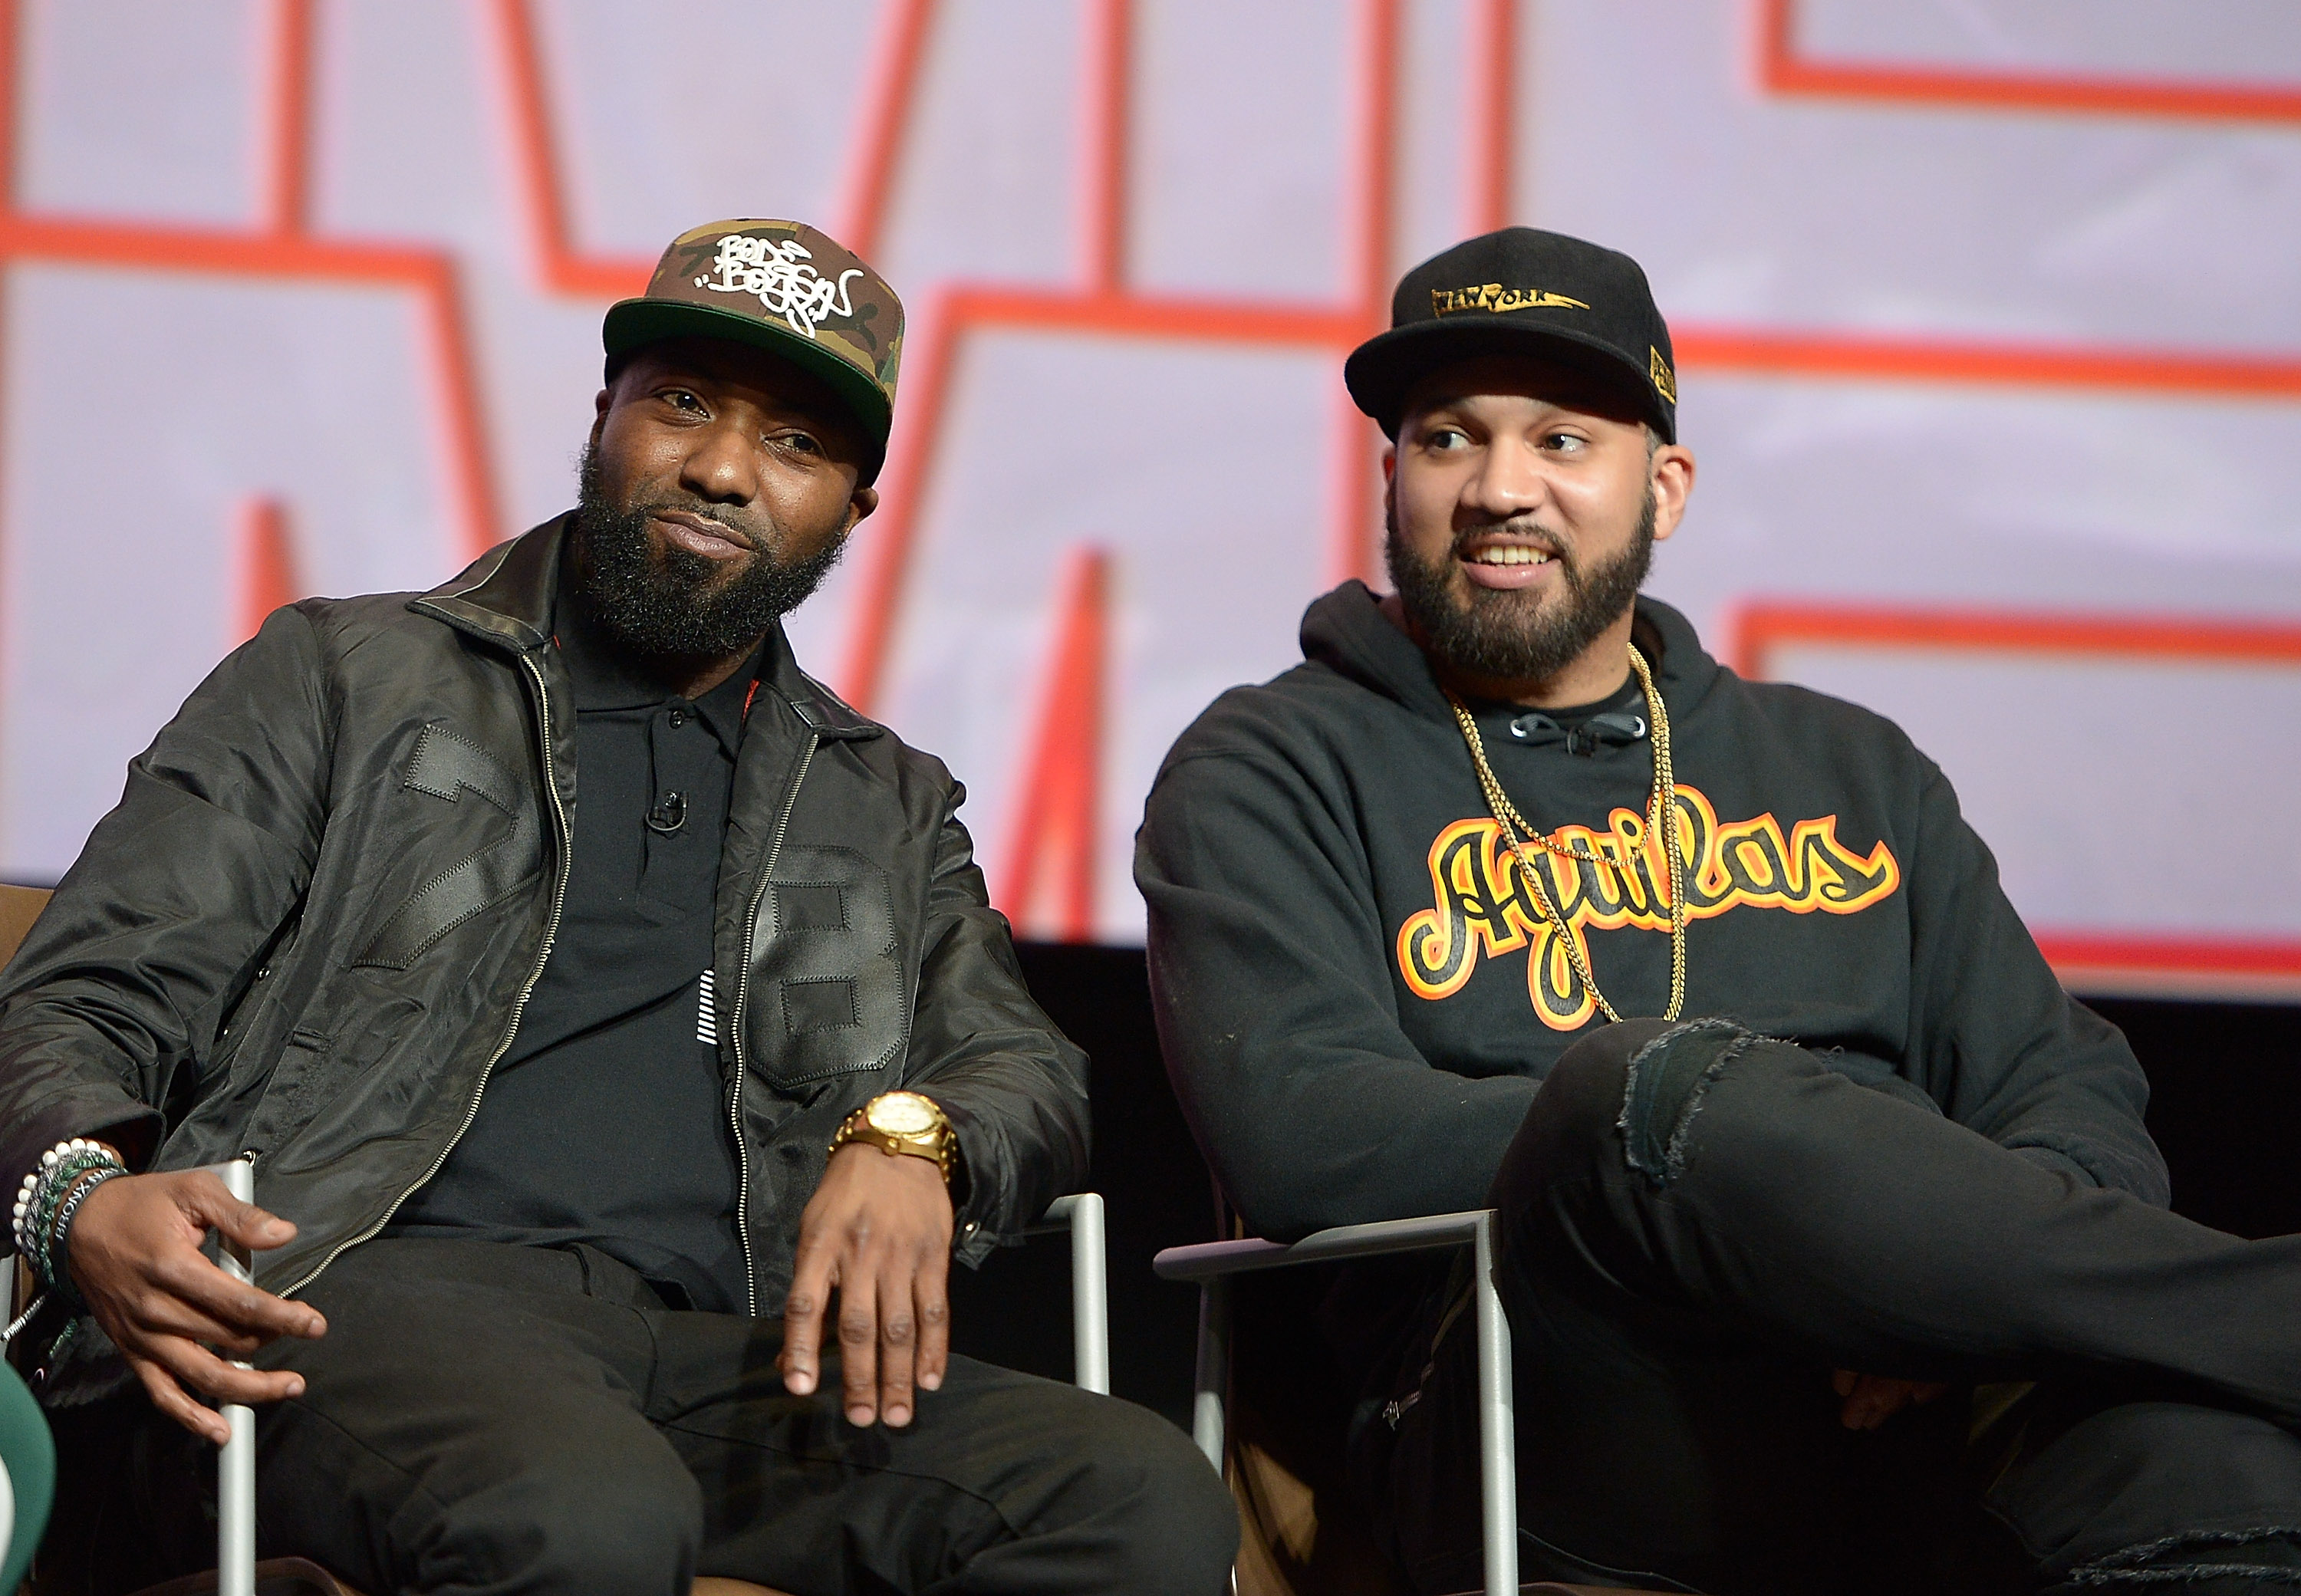 Desus Nice and The Kid Mero participate in a q&a at the FYC Event for VICELAND's DESUS & MERO at Saban Media Center on April 20, 2018 in North Hollywood, California. (Charley Gallay—Getty Images for VICELAND)